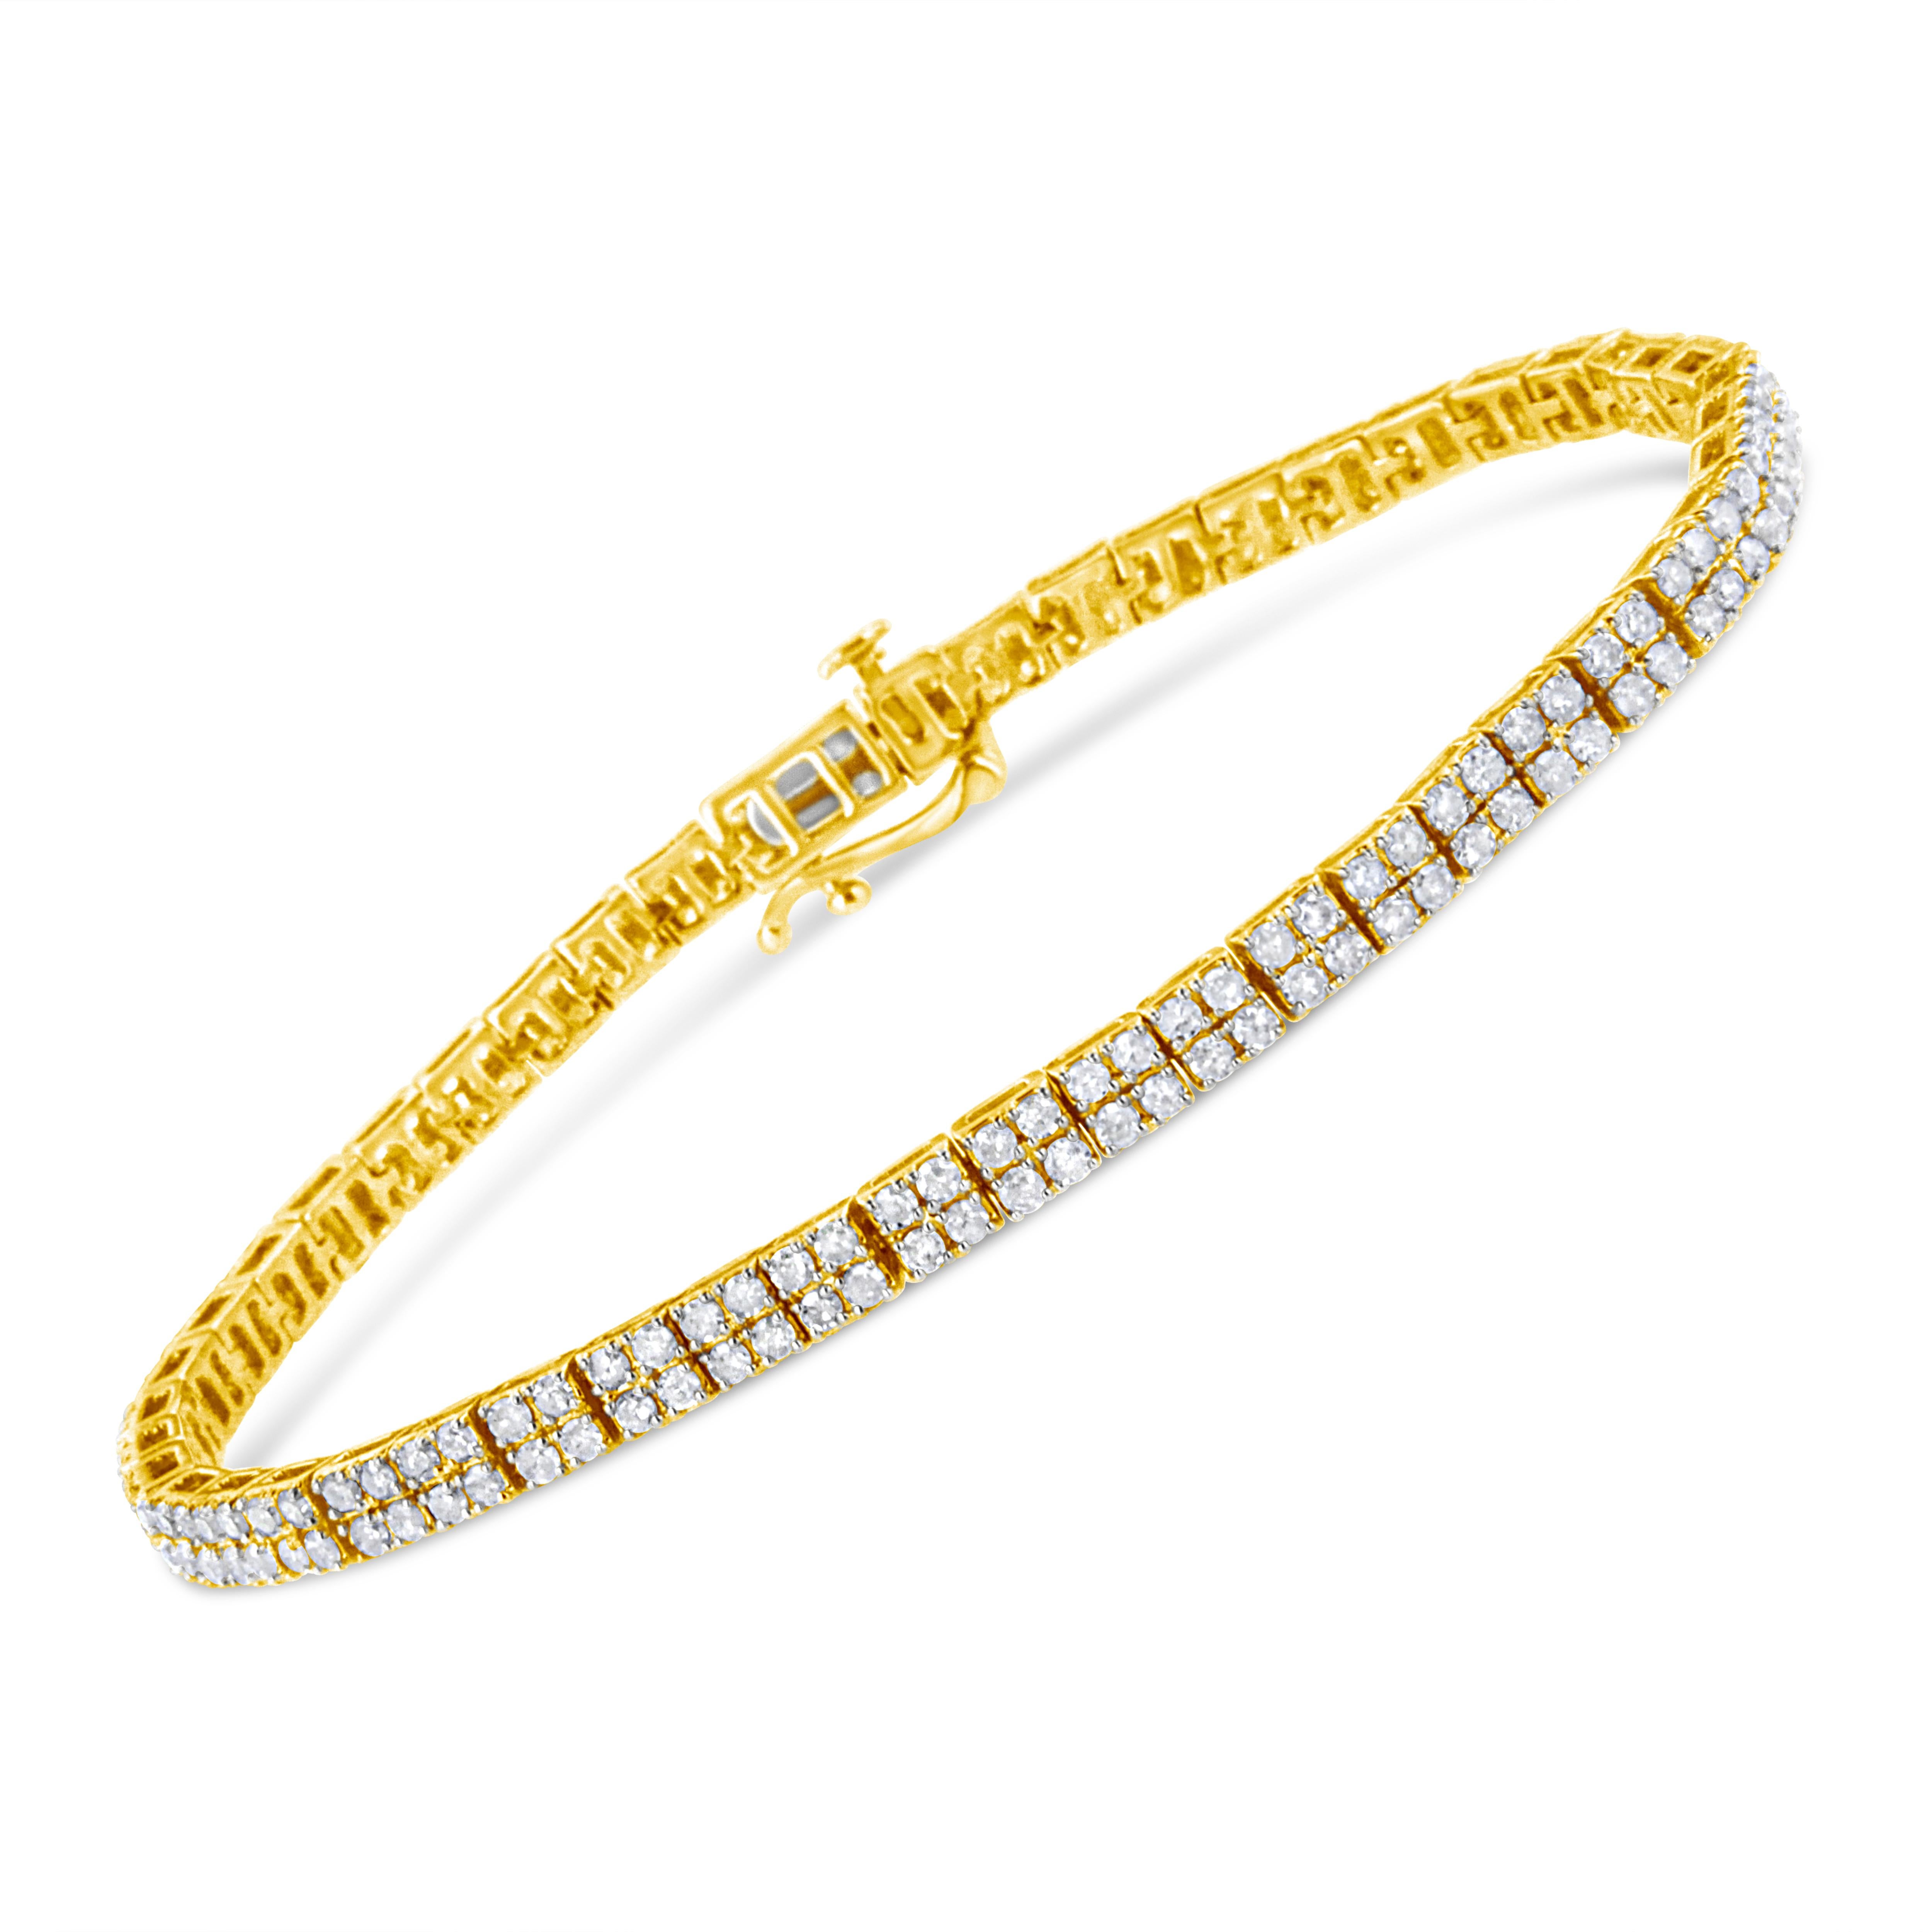 Modern yet timeless, this 14k yellow gold plated .925 sterling silver piece is a twist on the classic link bracelet. Yellow gold square links of 4 round-cut diamonds each make up the design of this everlasting piece. The diamonds sit in a striking